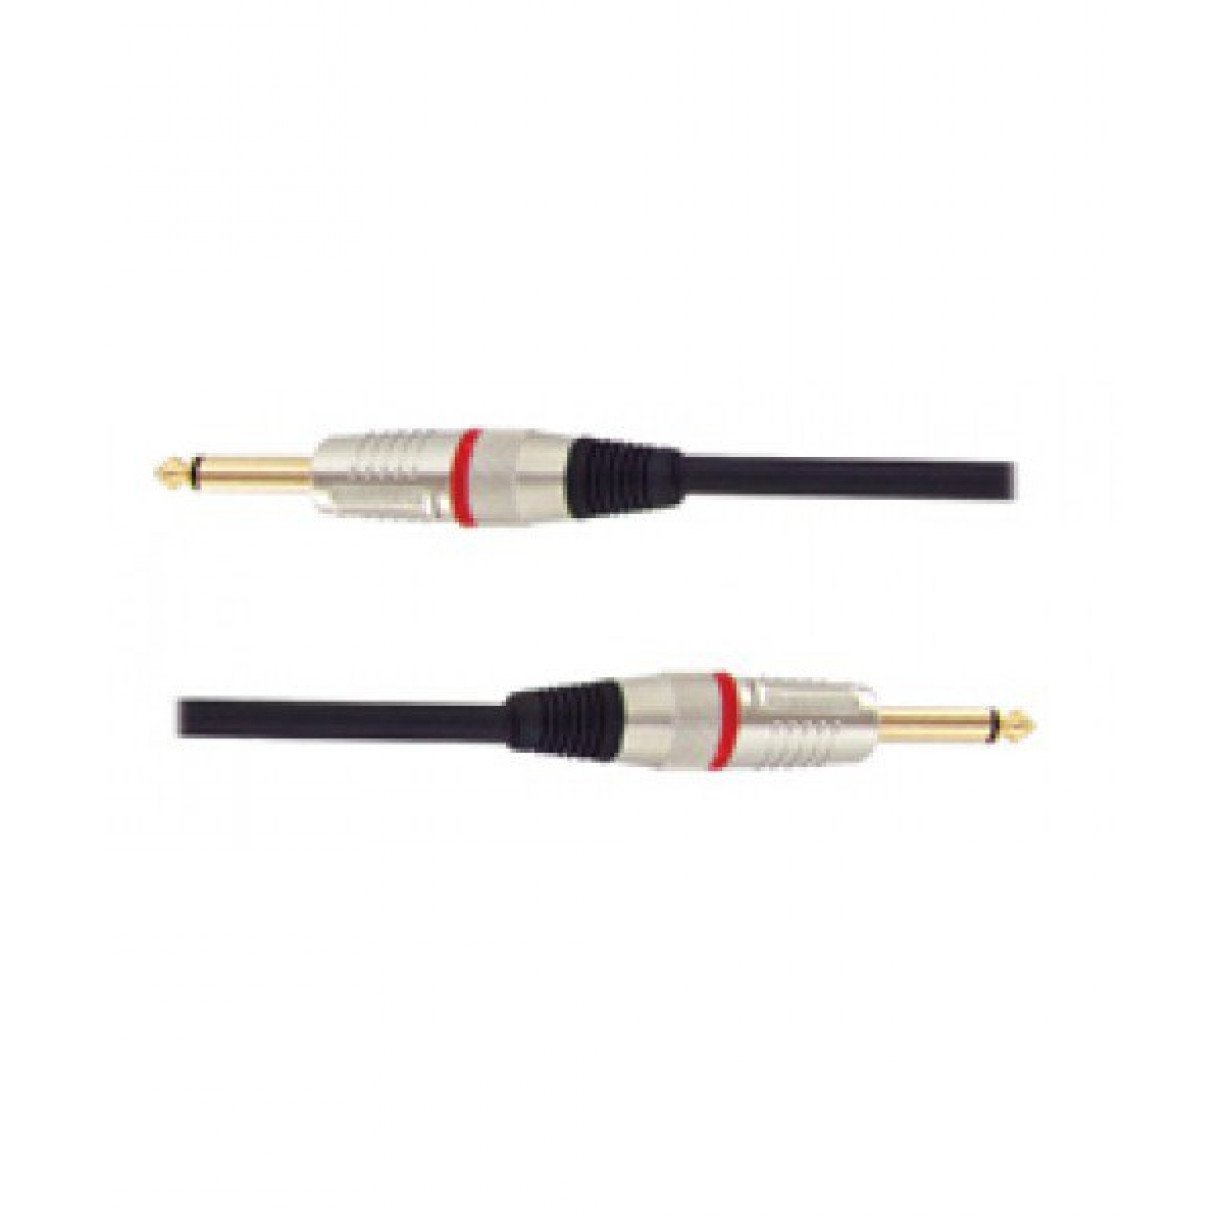 Carson RSH20 20 foot 1/4 inch Speaker Cable